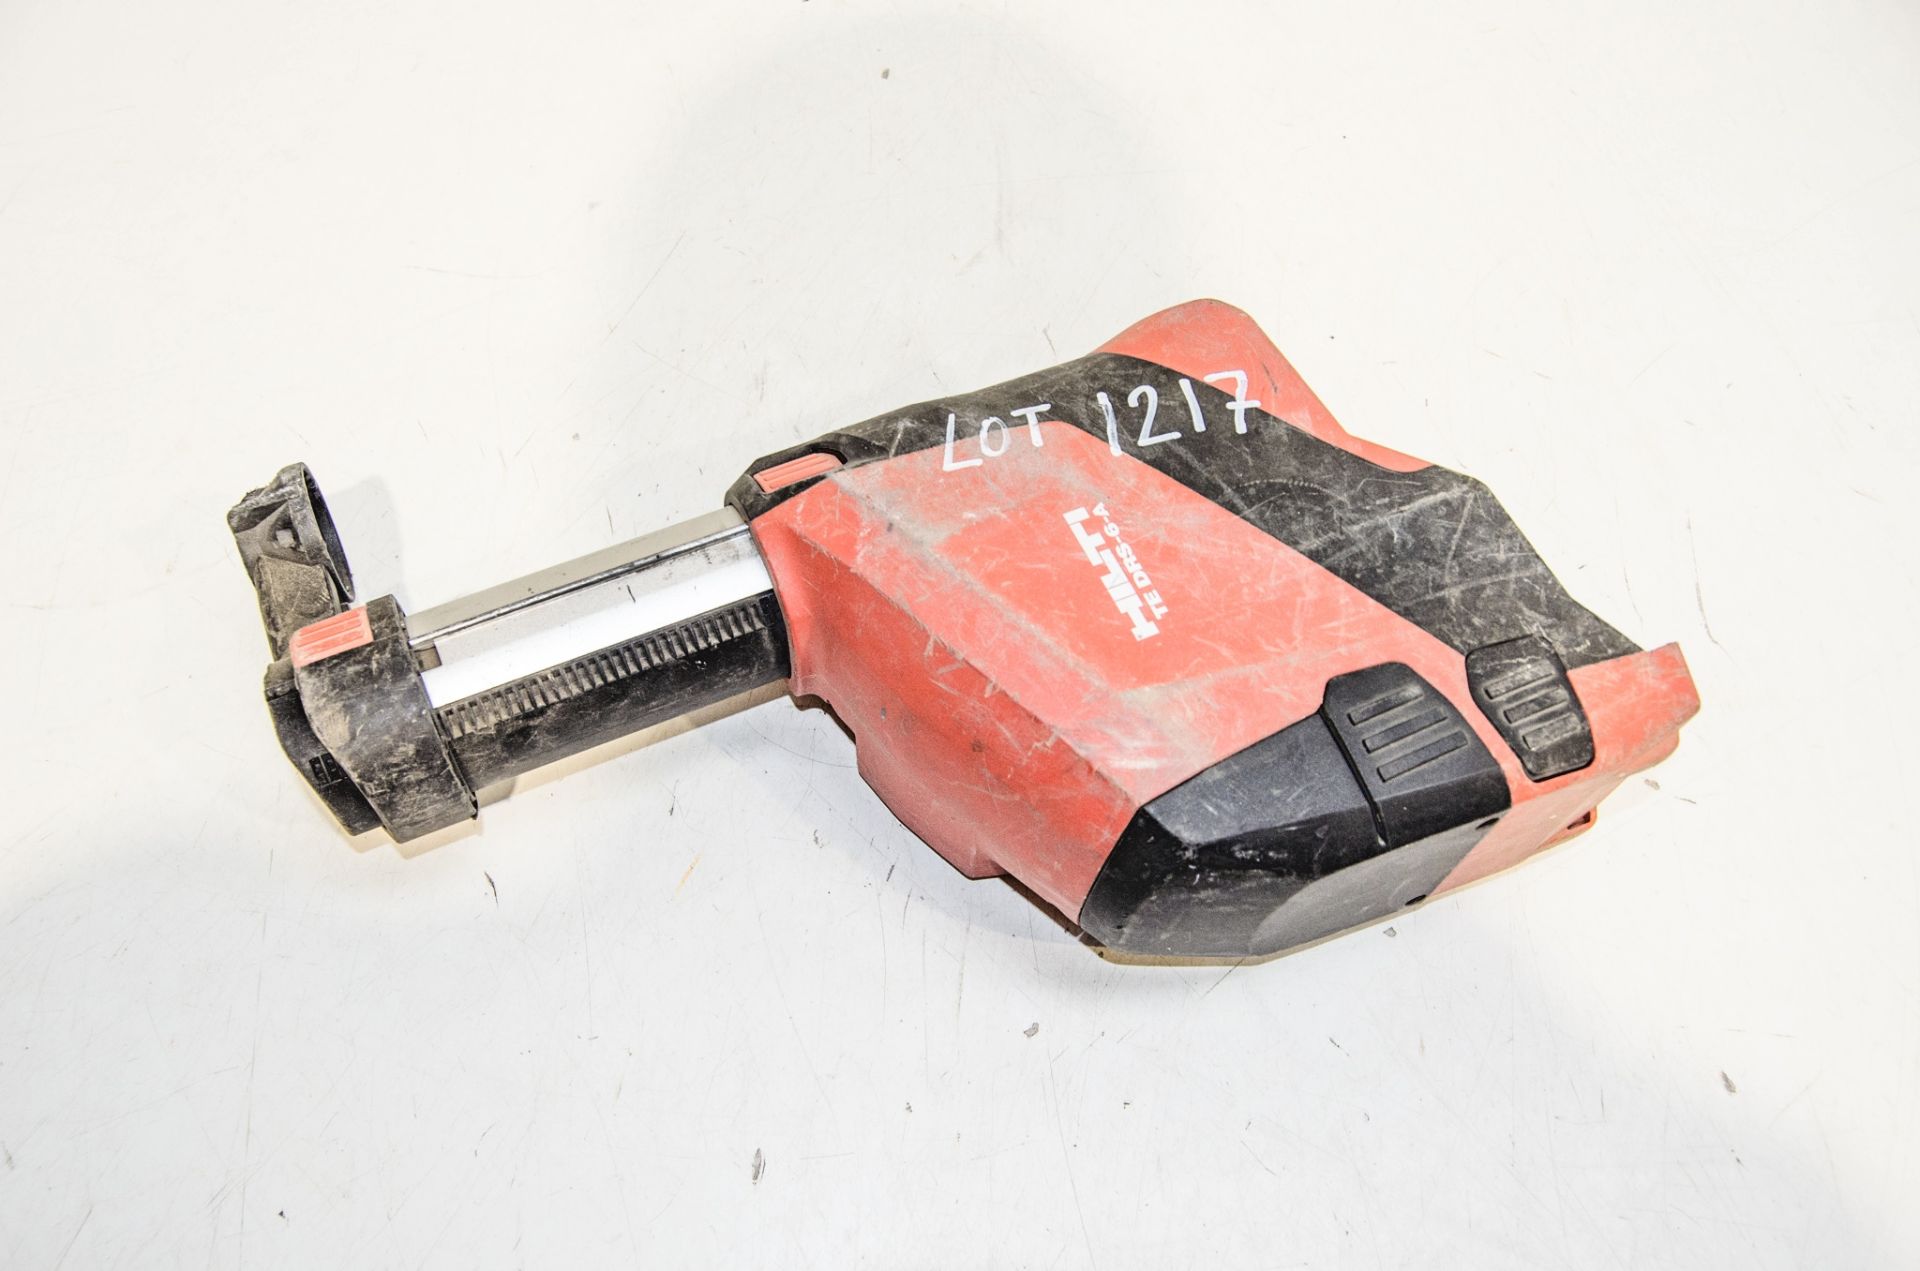 Hilti TE DRS-6-A dust extractor attachment